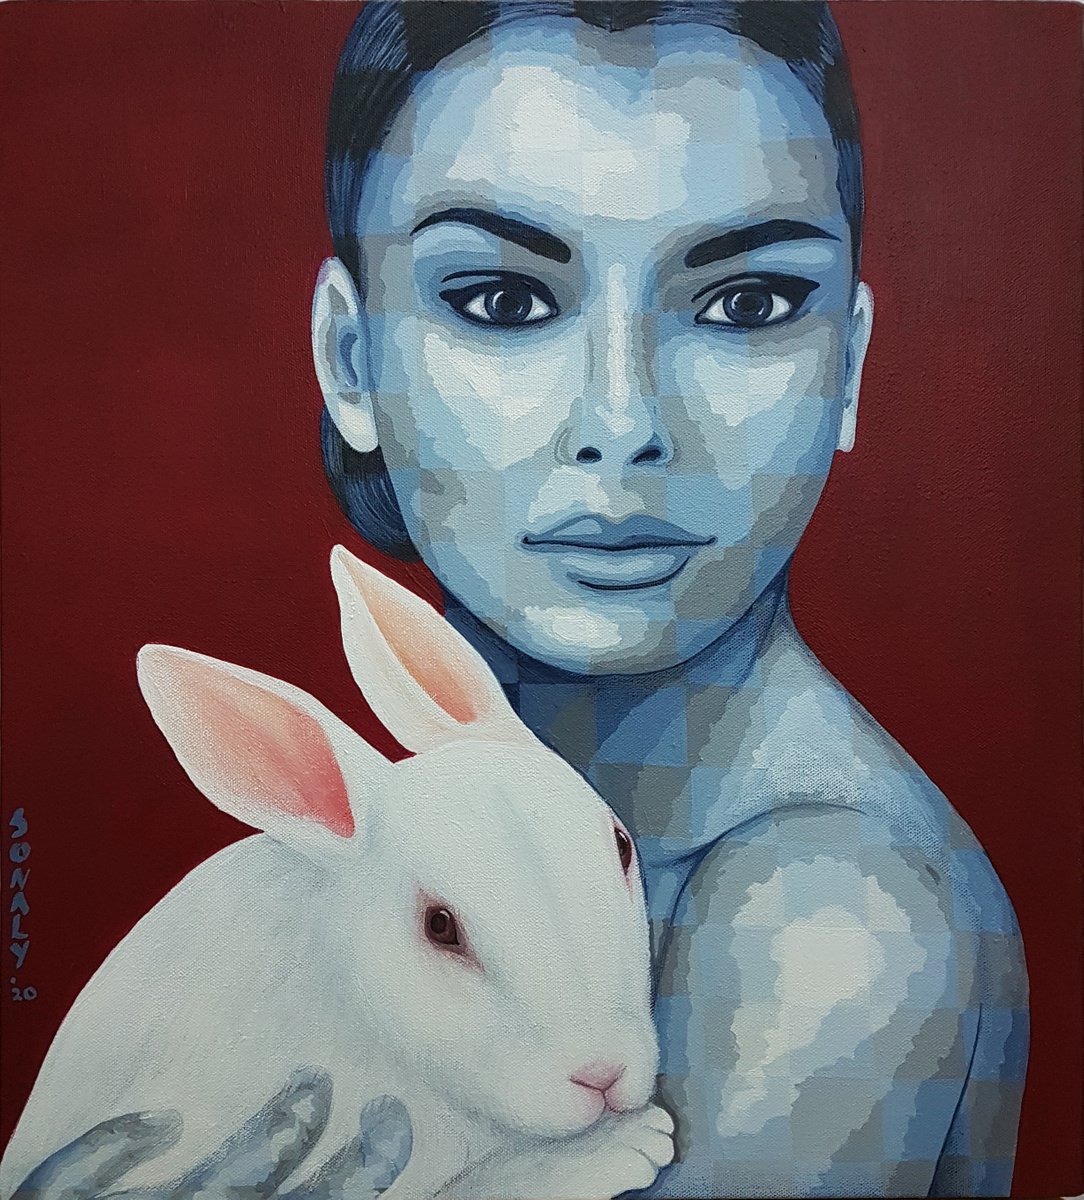 Lady and Rabbit by Sonaly Gandhi